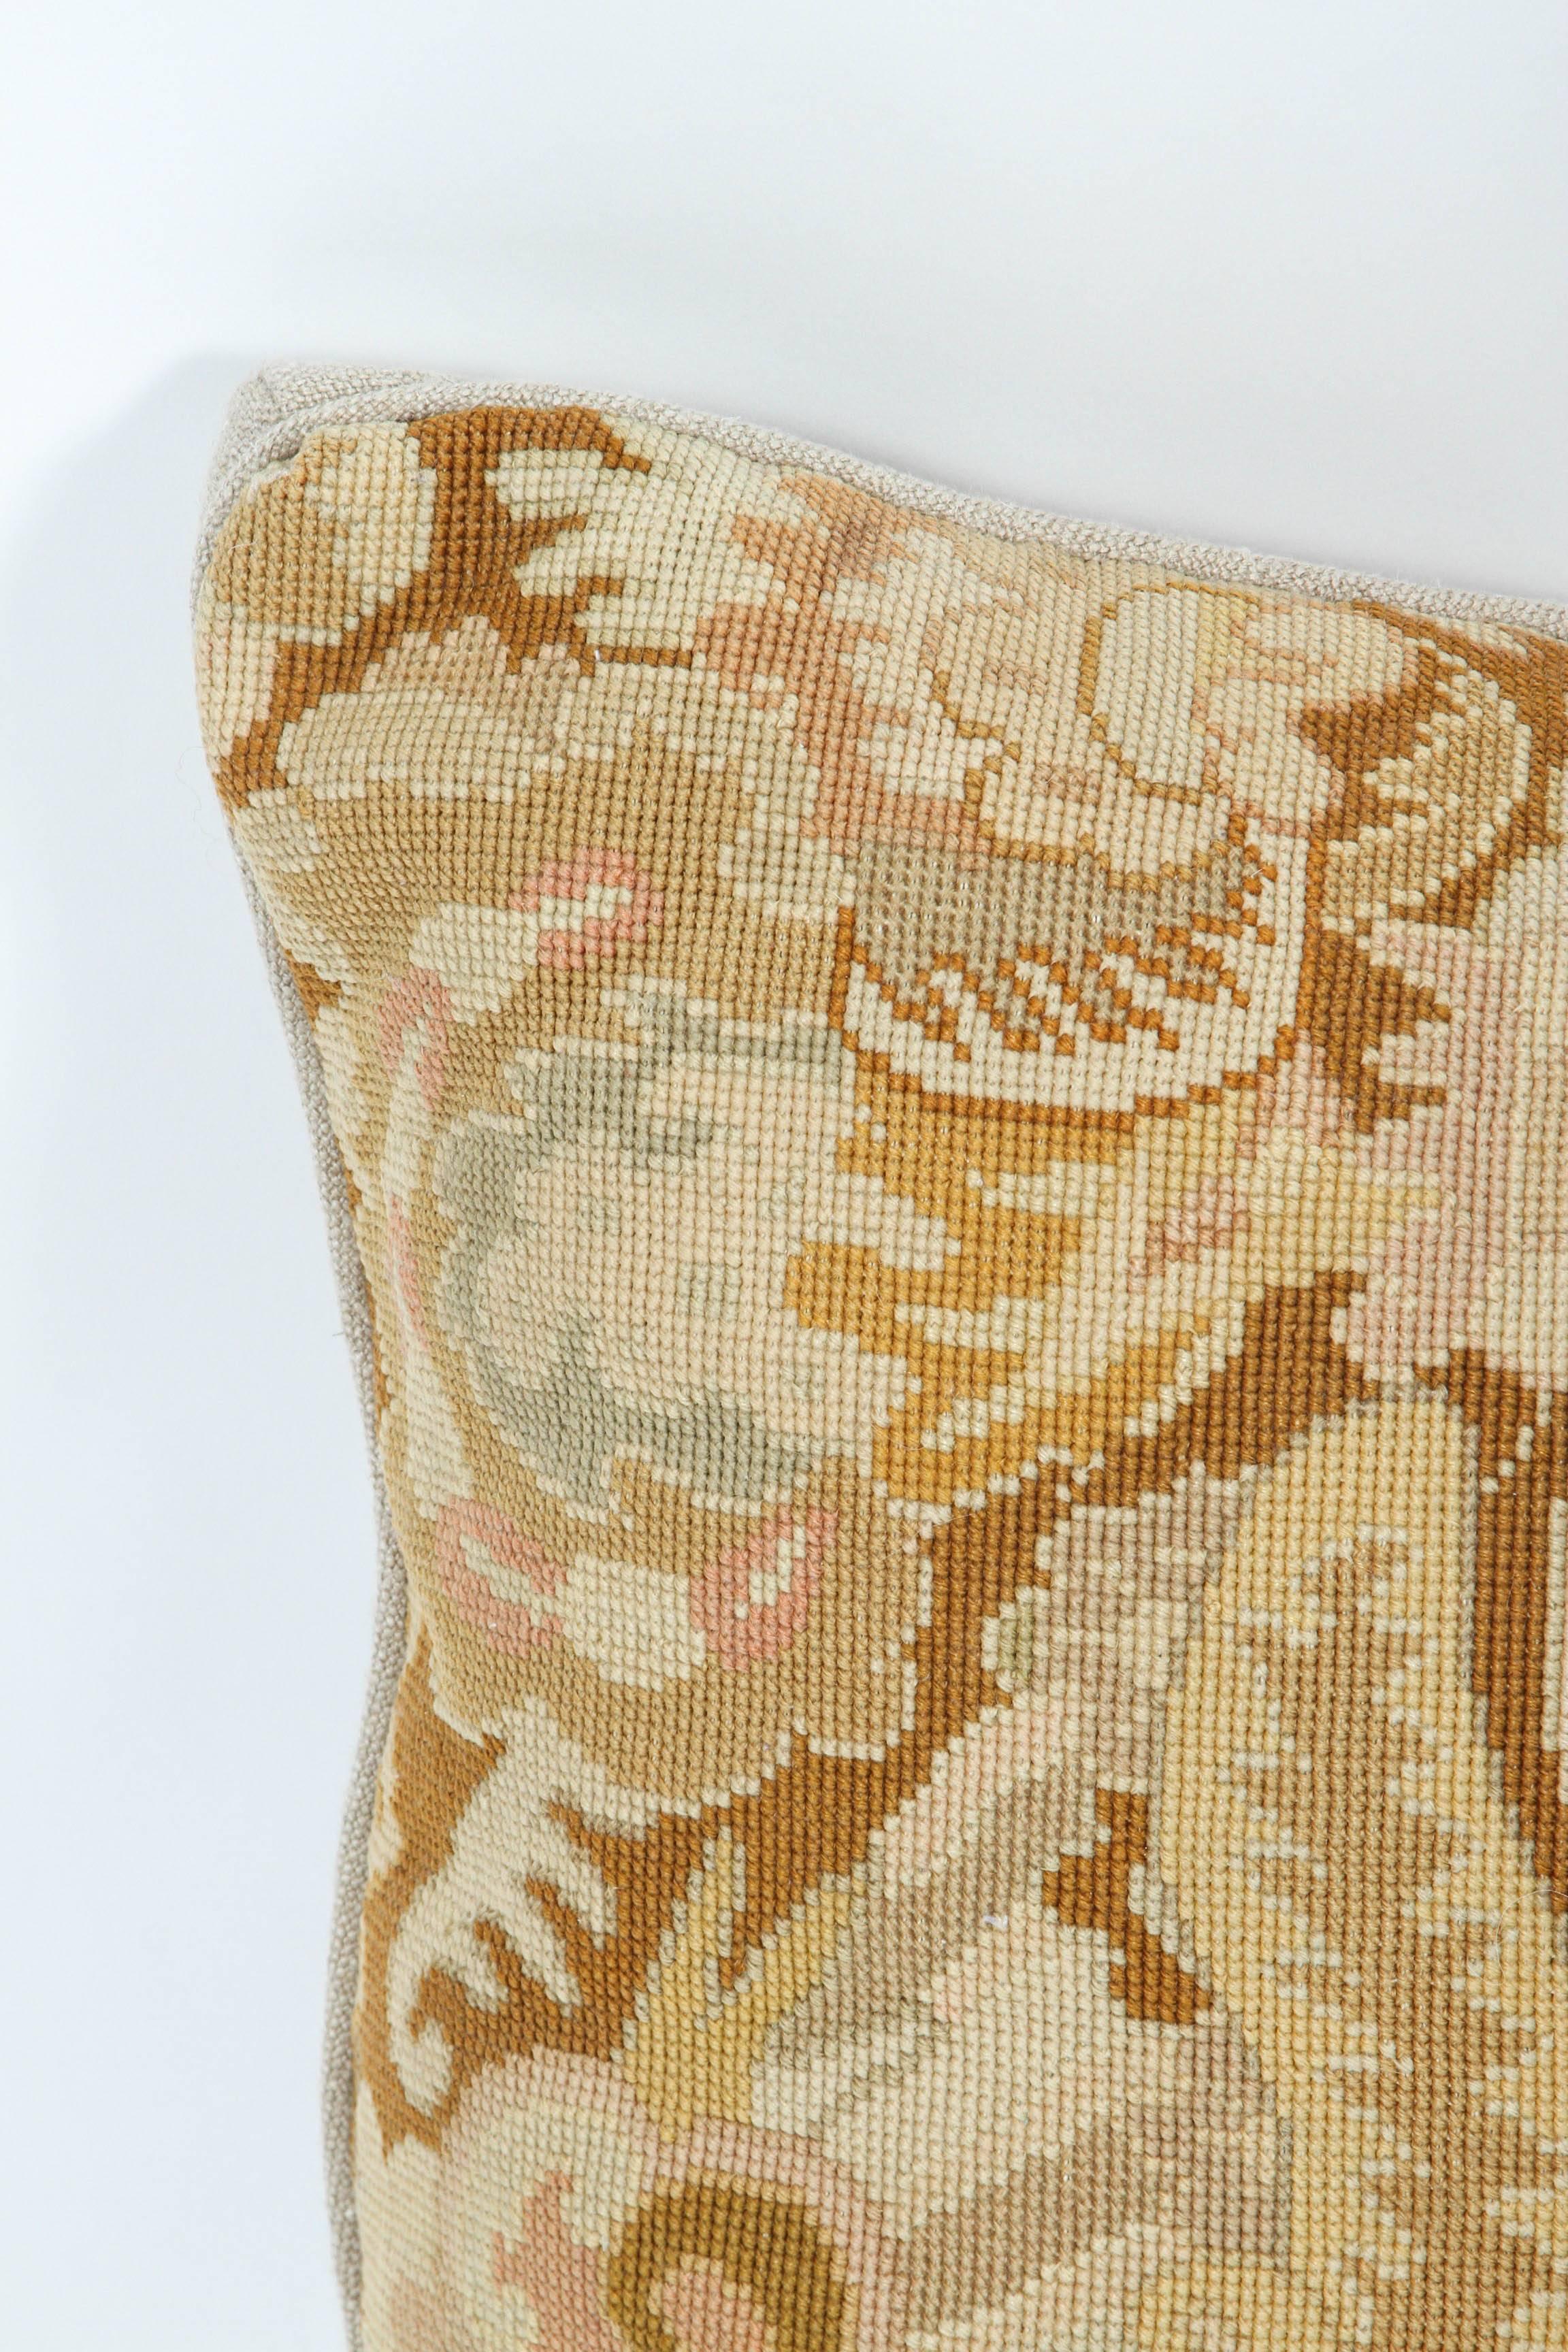 Vintage needlepoint fabric newly made into a pillow with vintage linen back and new feather fill.